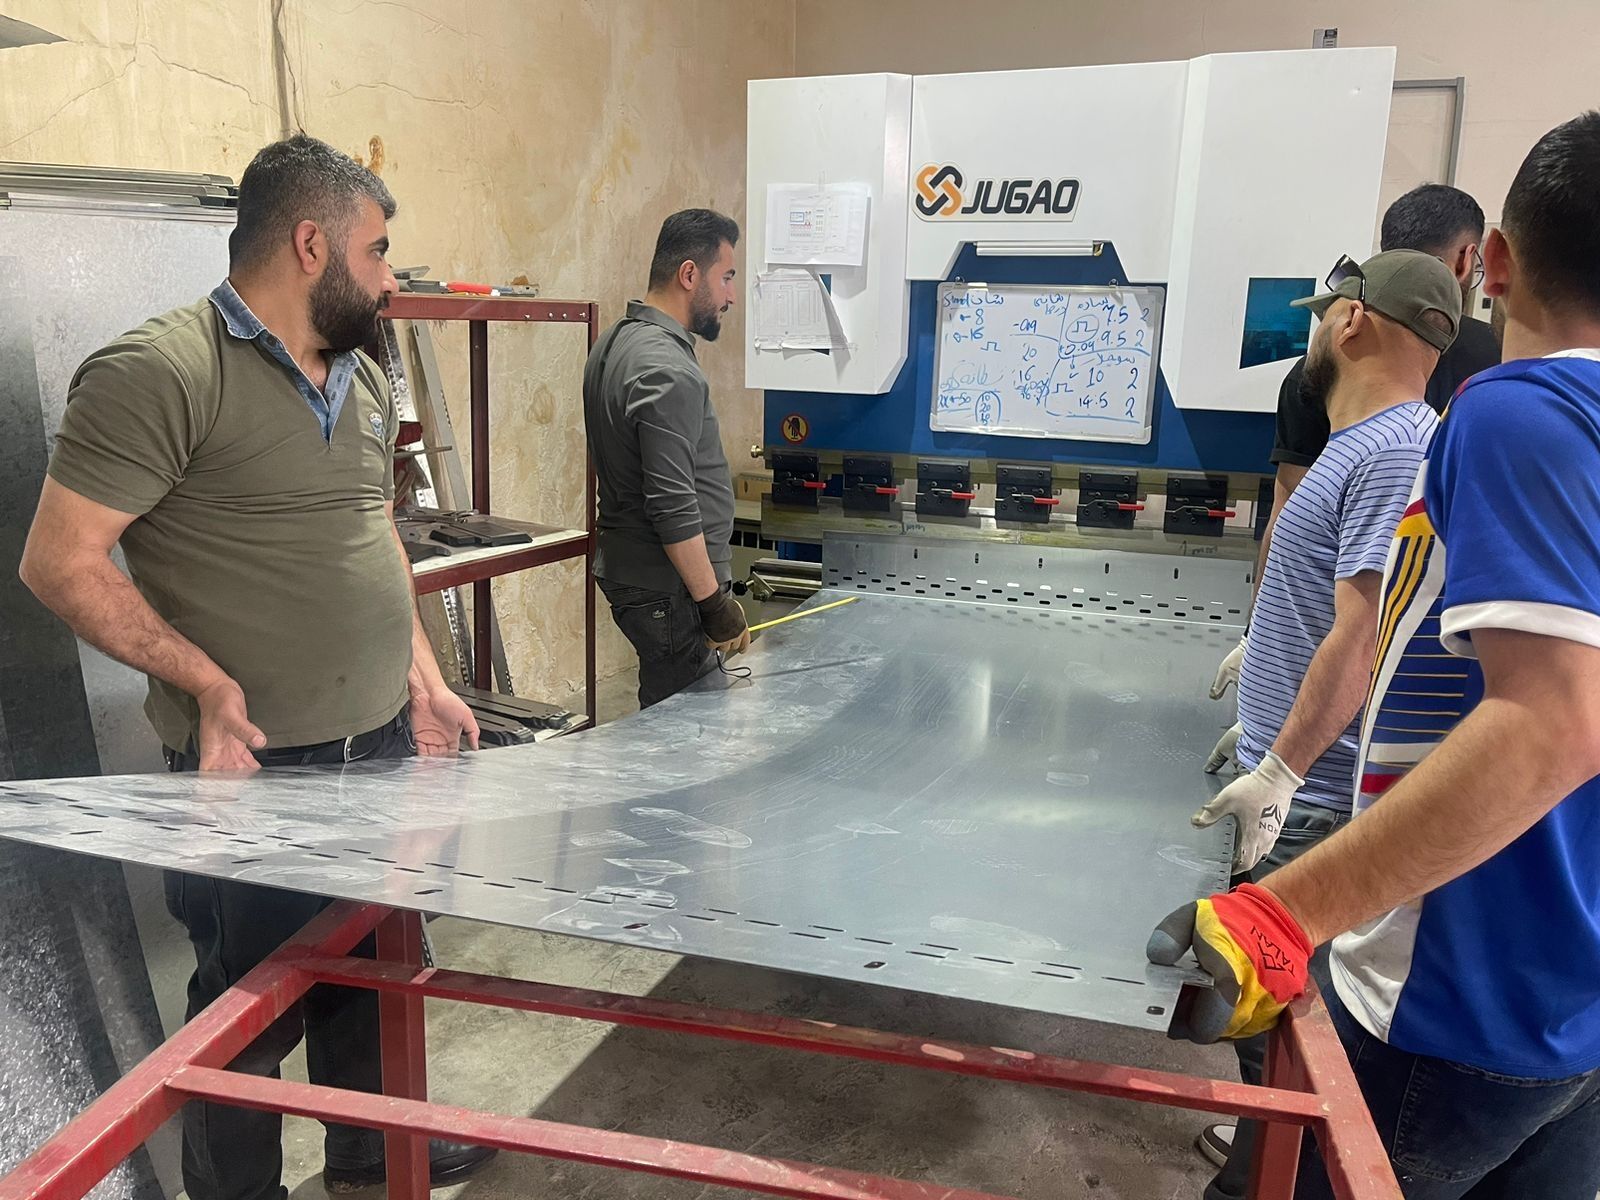 Iraqi customers received a JUGAO bending machine and were extremely satisfied